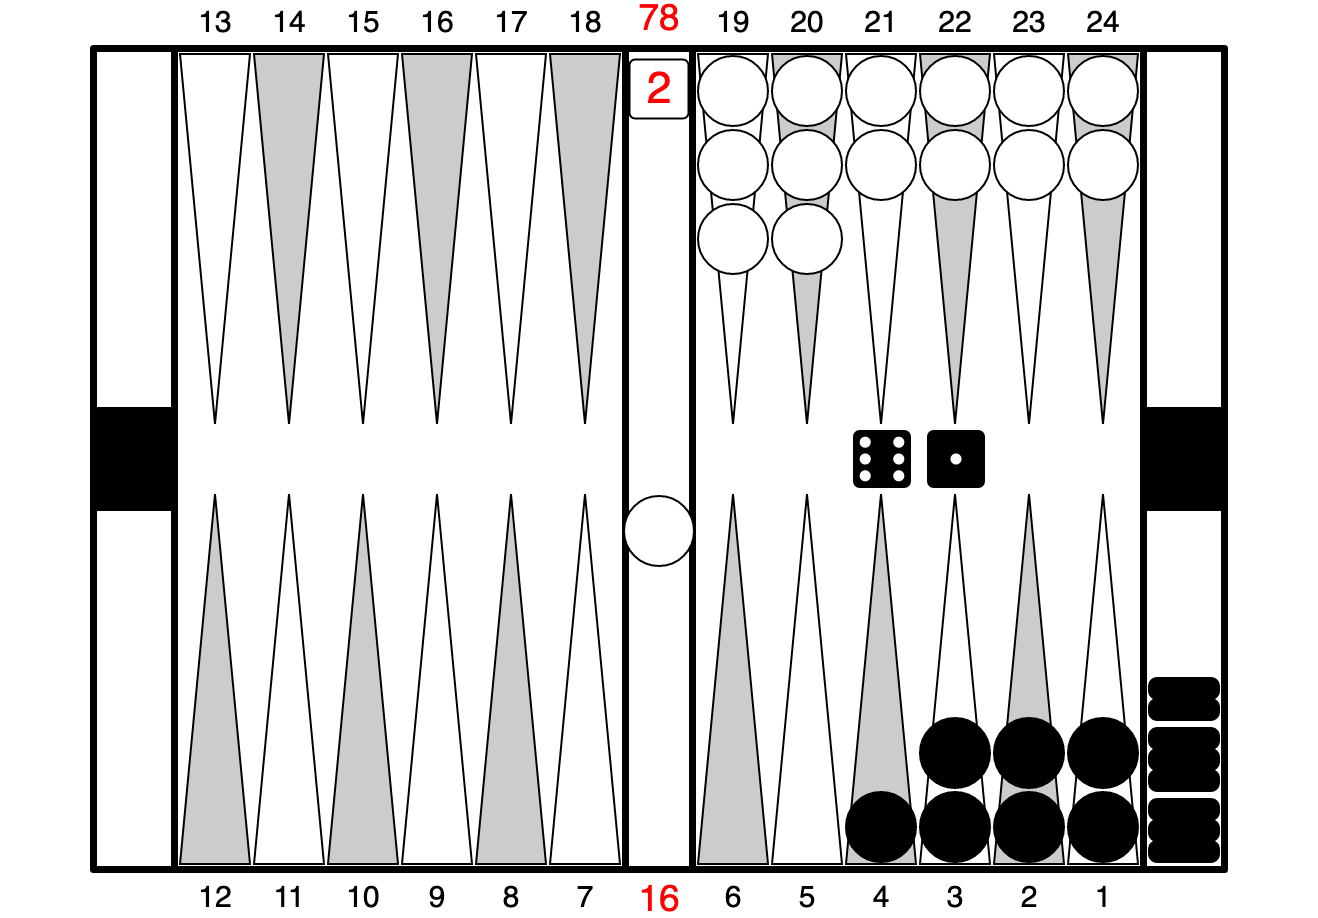 A position that many beginning backgammon players get wrong. An example of how to play your checkers during bear off to not leave a blot. 